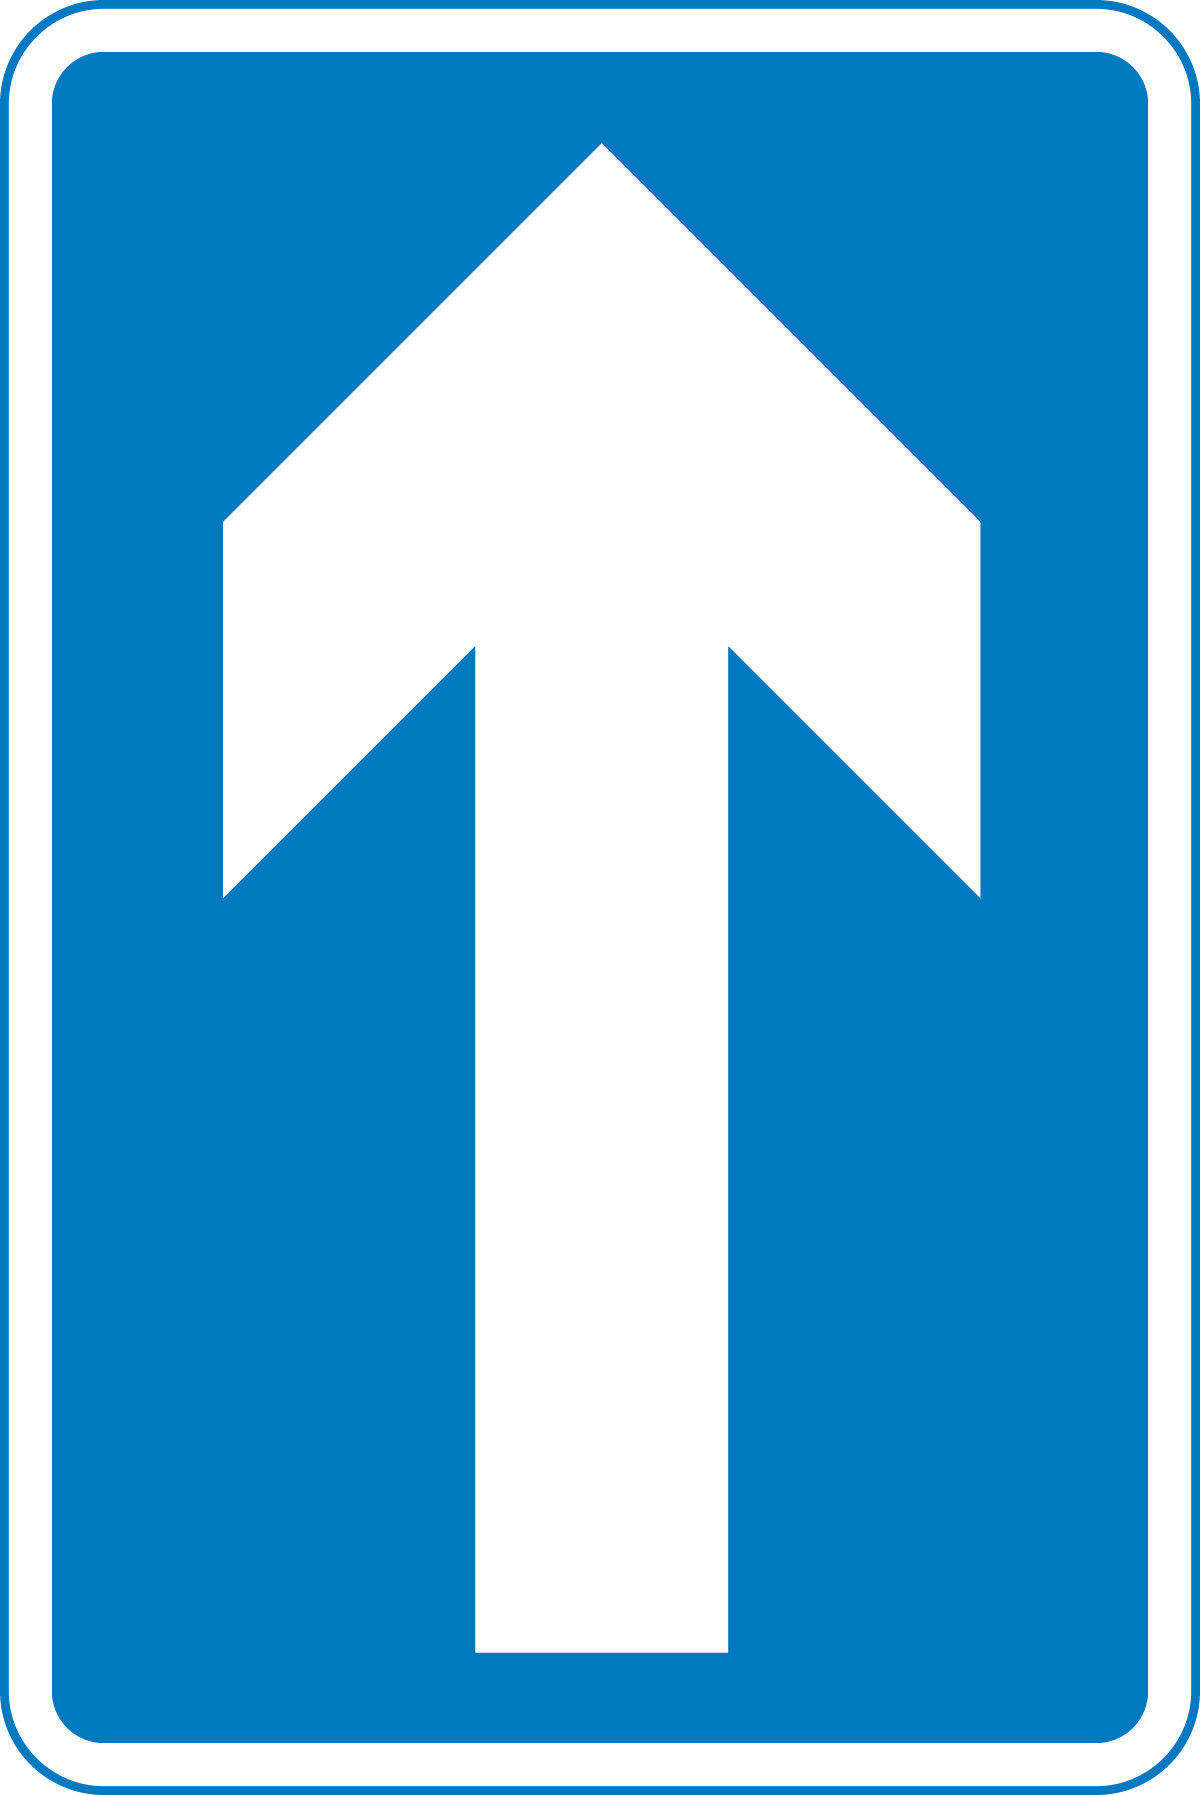 One-way traffic sign - Theory Test